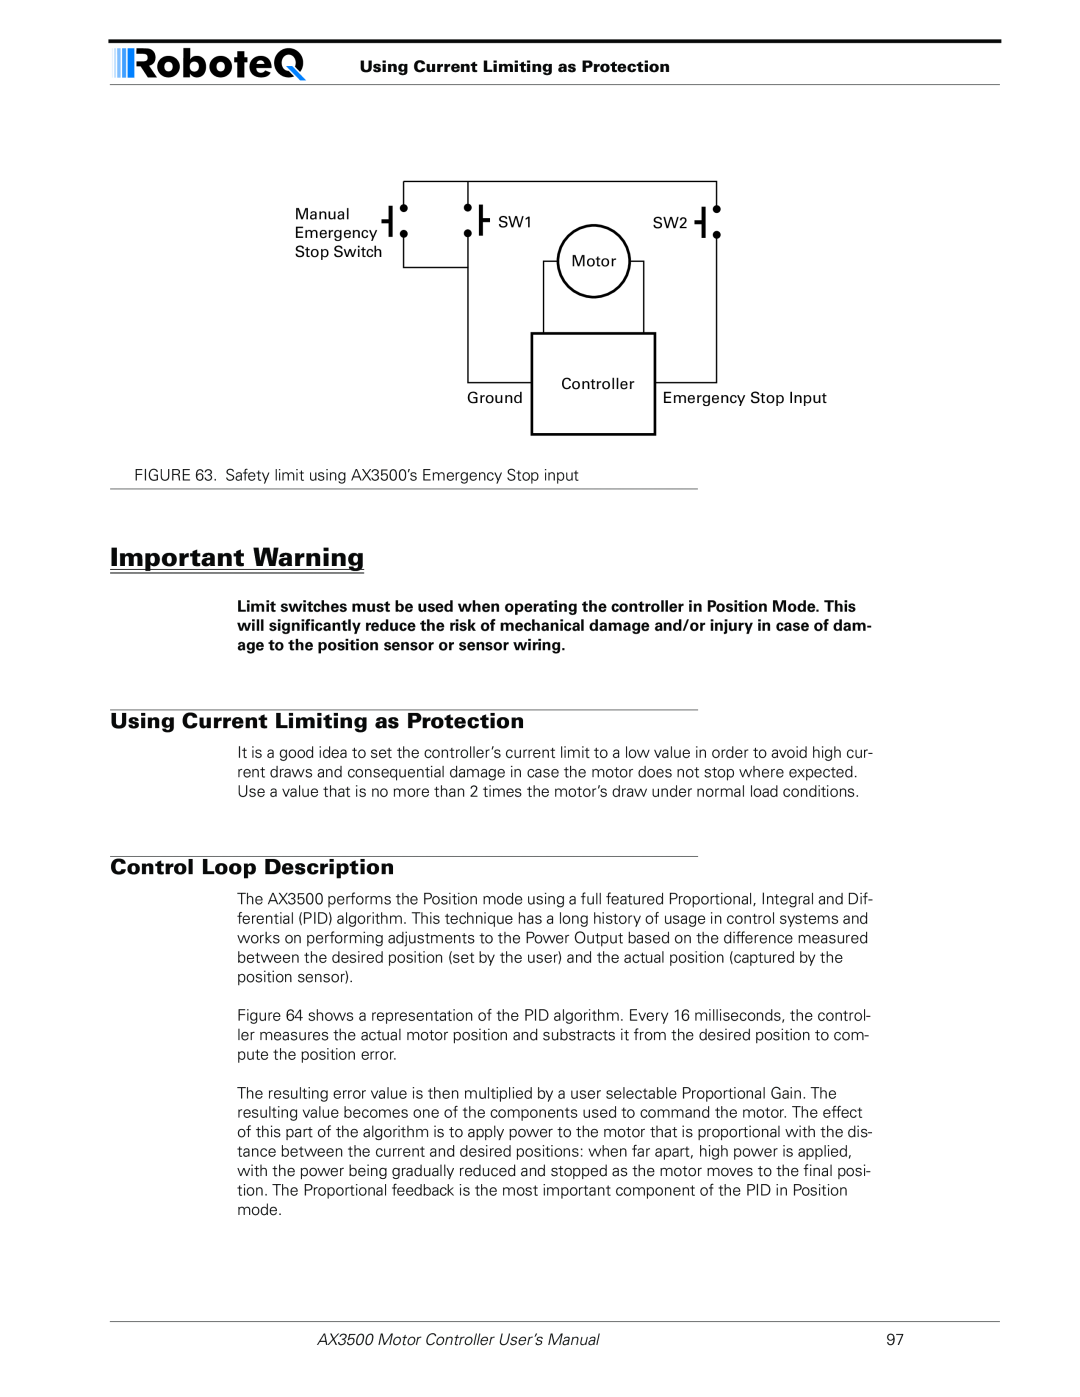 RoboteQ AX3500 user manual Using Current Limiting as Protection, Control Loop Description, Important Warning 